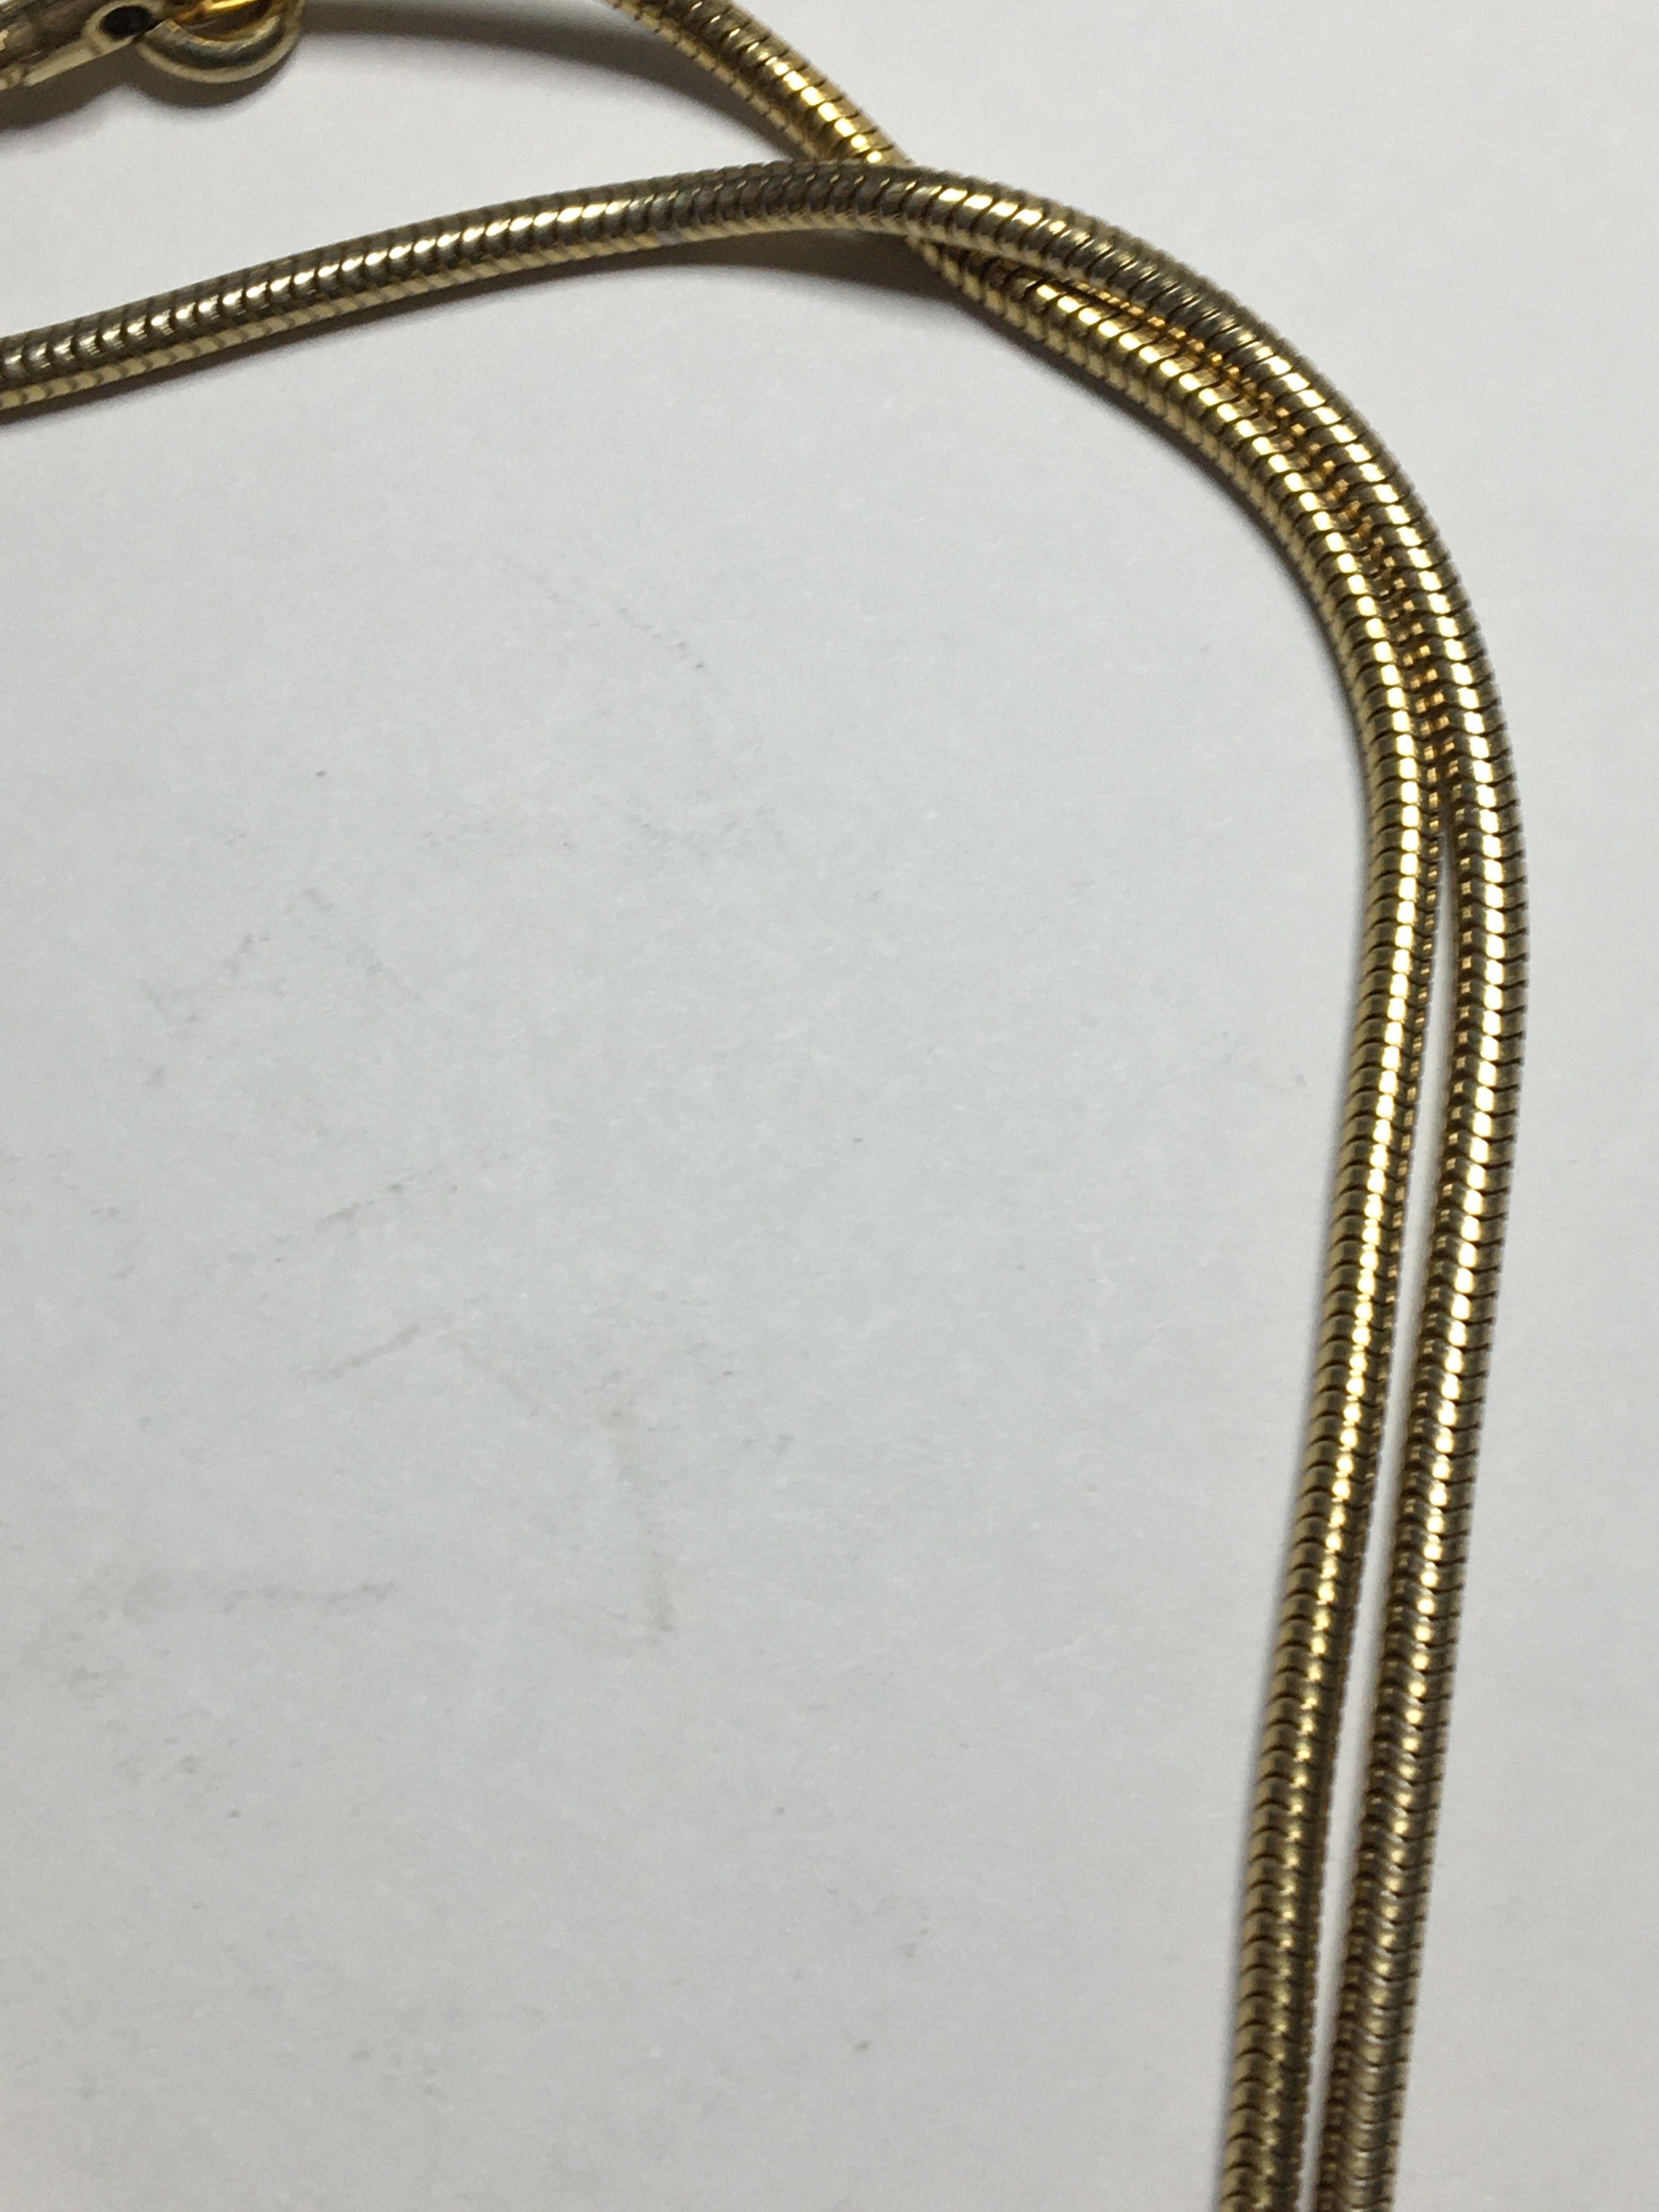 24kt Gold Layered Vintage Chain Huge 36+ Inches Thick Heavy Piece 24 Grams